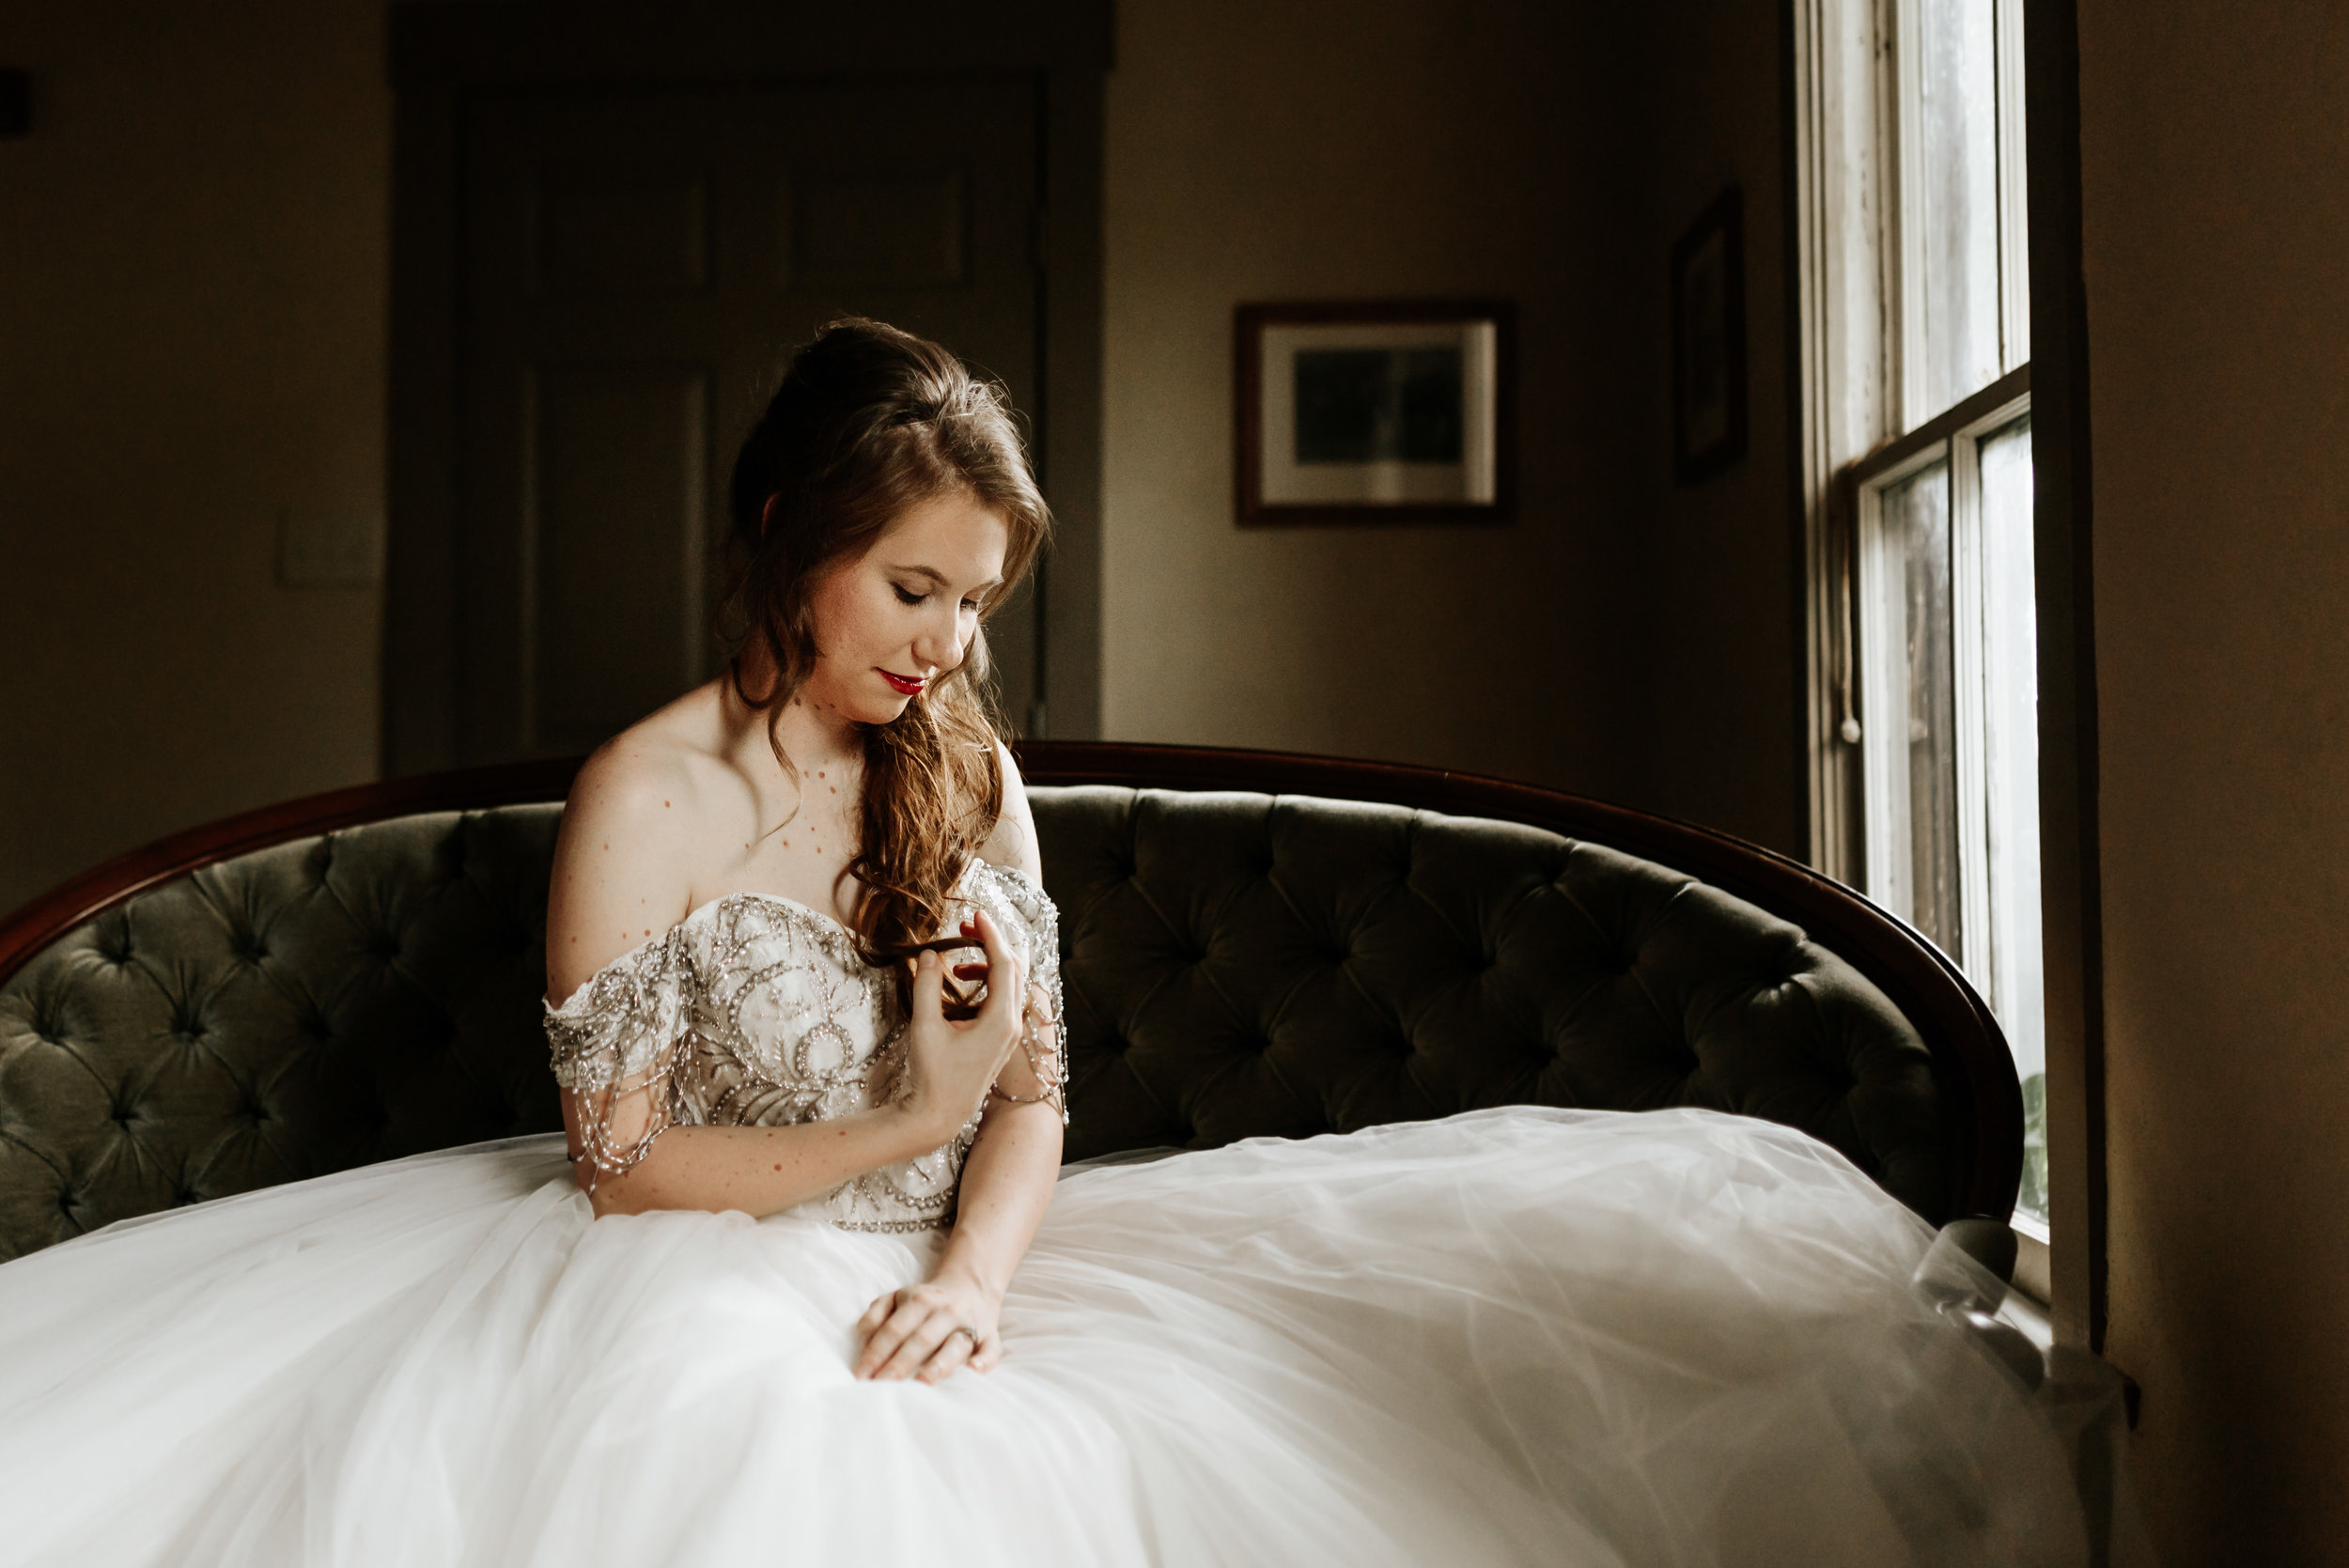 Grant-Station-Styled-Shoot-Whimsical-Moody-Fairytale-Wedding-Photography-by-V-9596.jpg